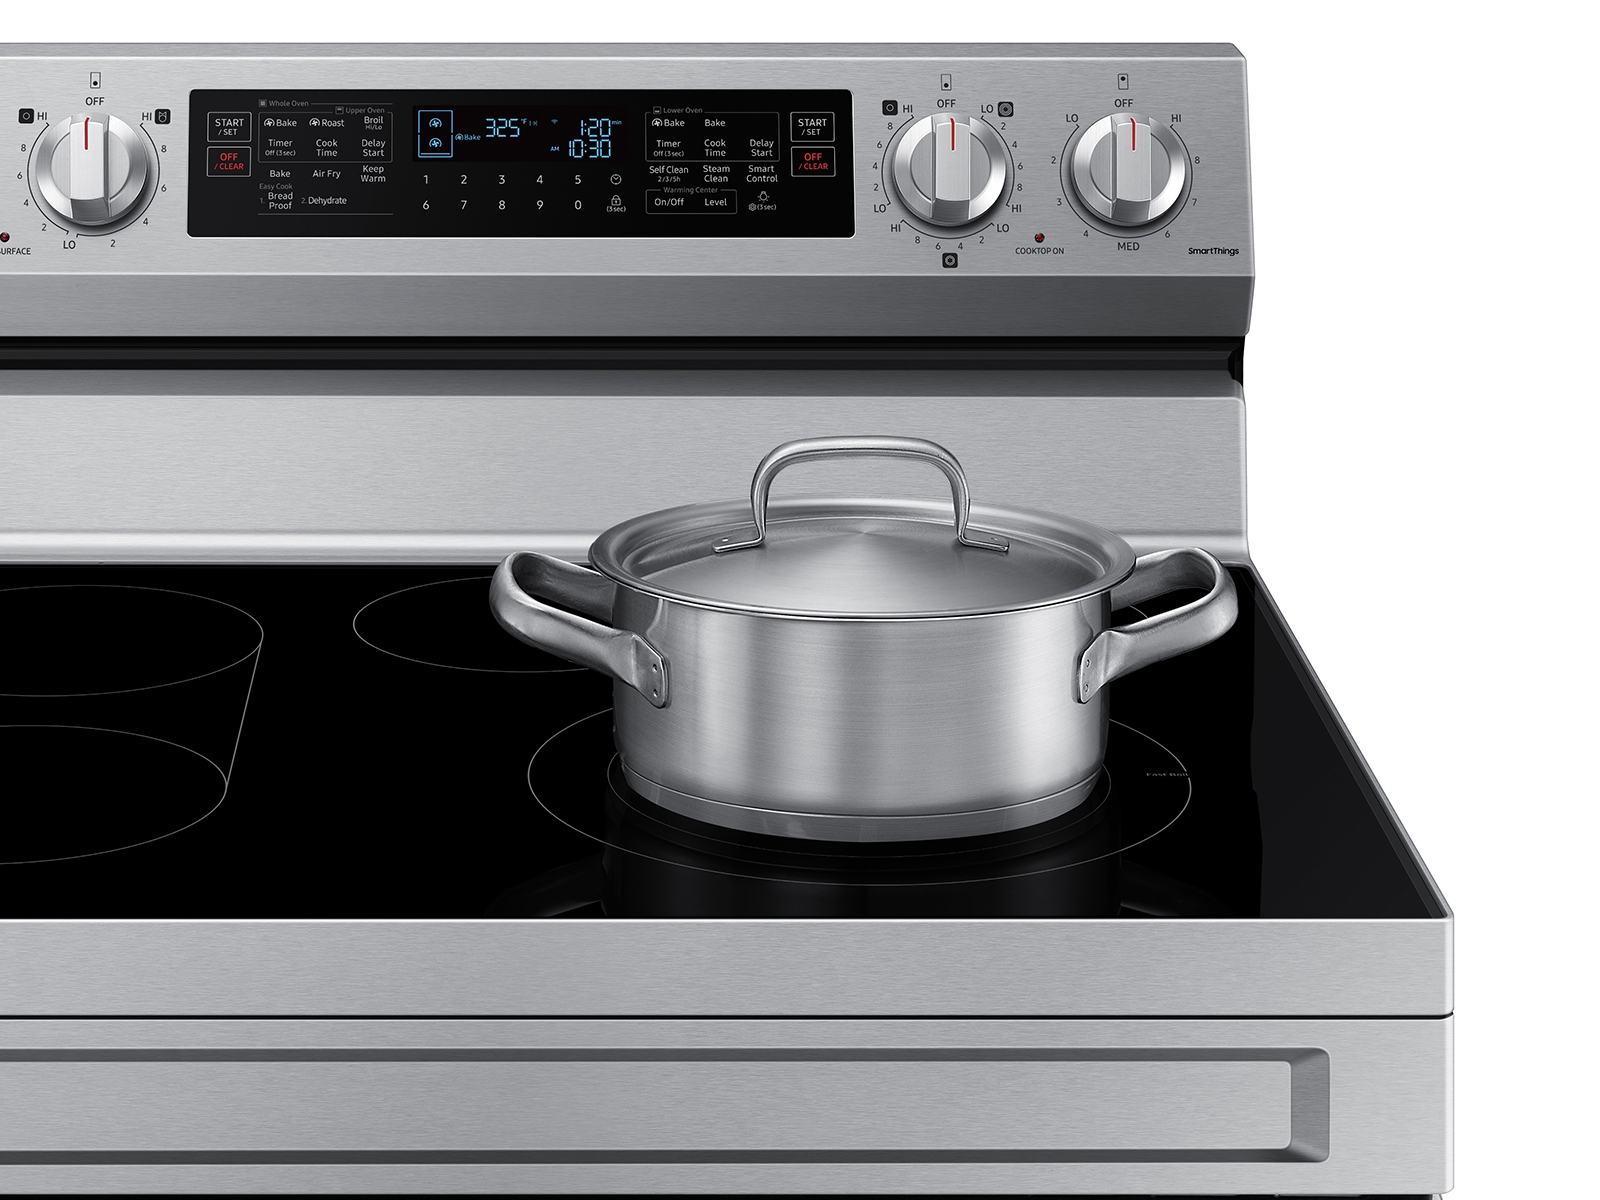 Samsung 6.3 cu. ft. Flex Duo Front Control Slide-in Electric Range with  Smart Dial, Air Fry & Wi-Fi, Fingerprint Resistant Stainless Steel  NE63T8751SS - Best Buy